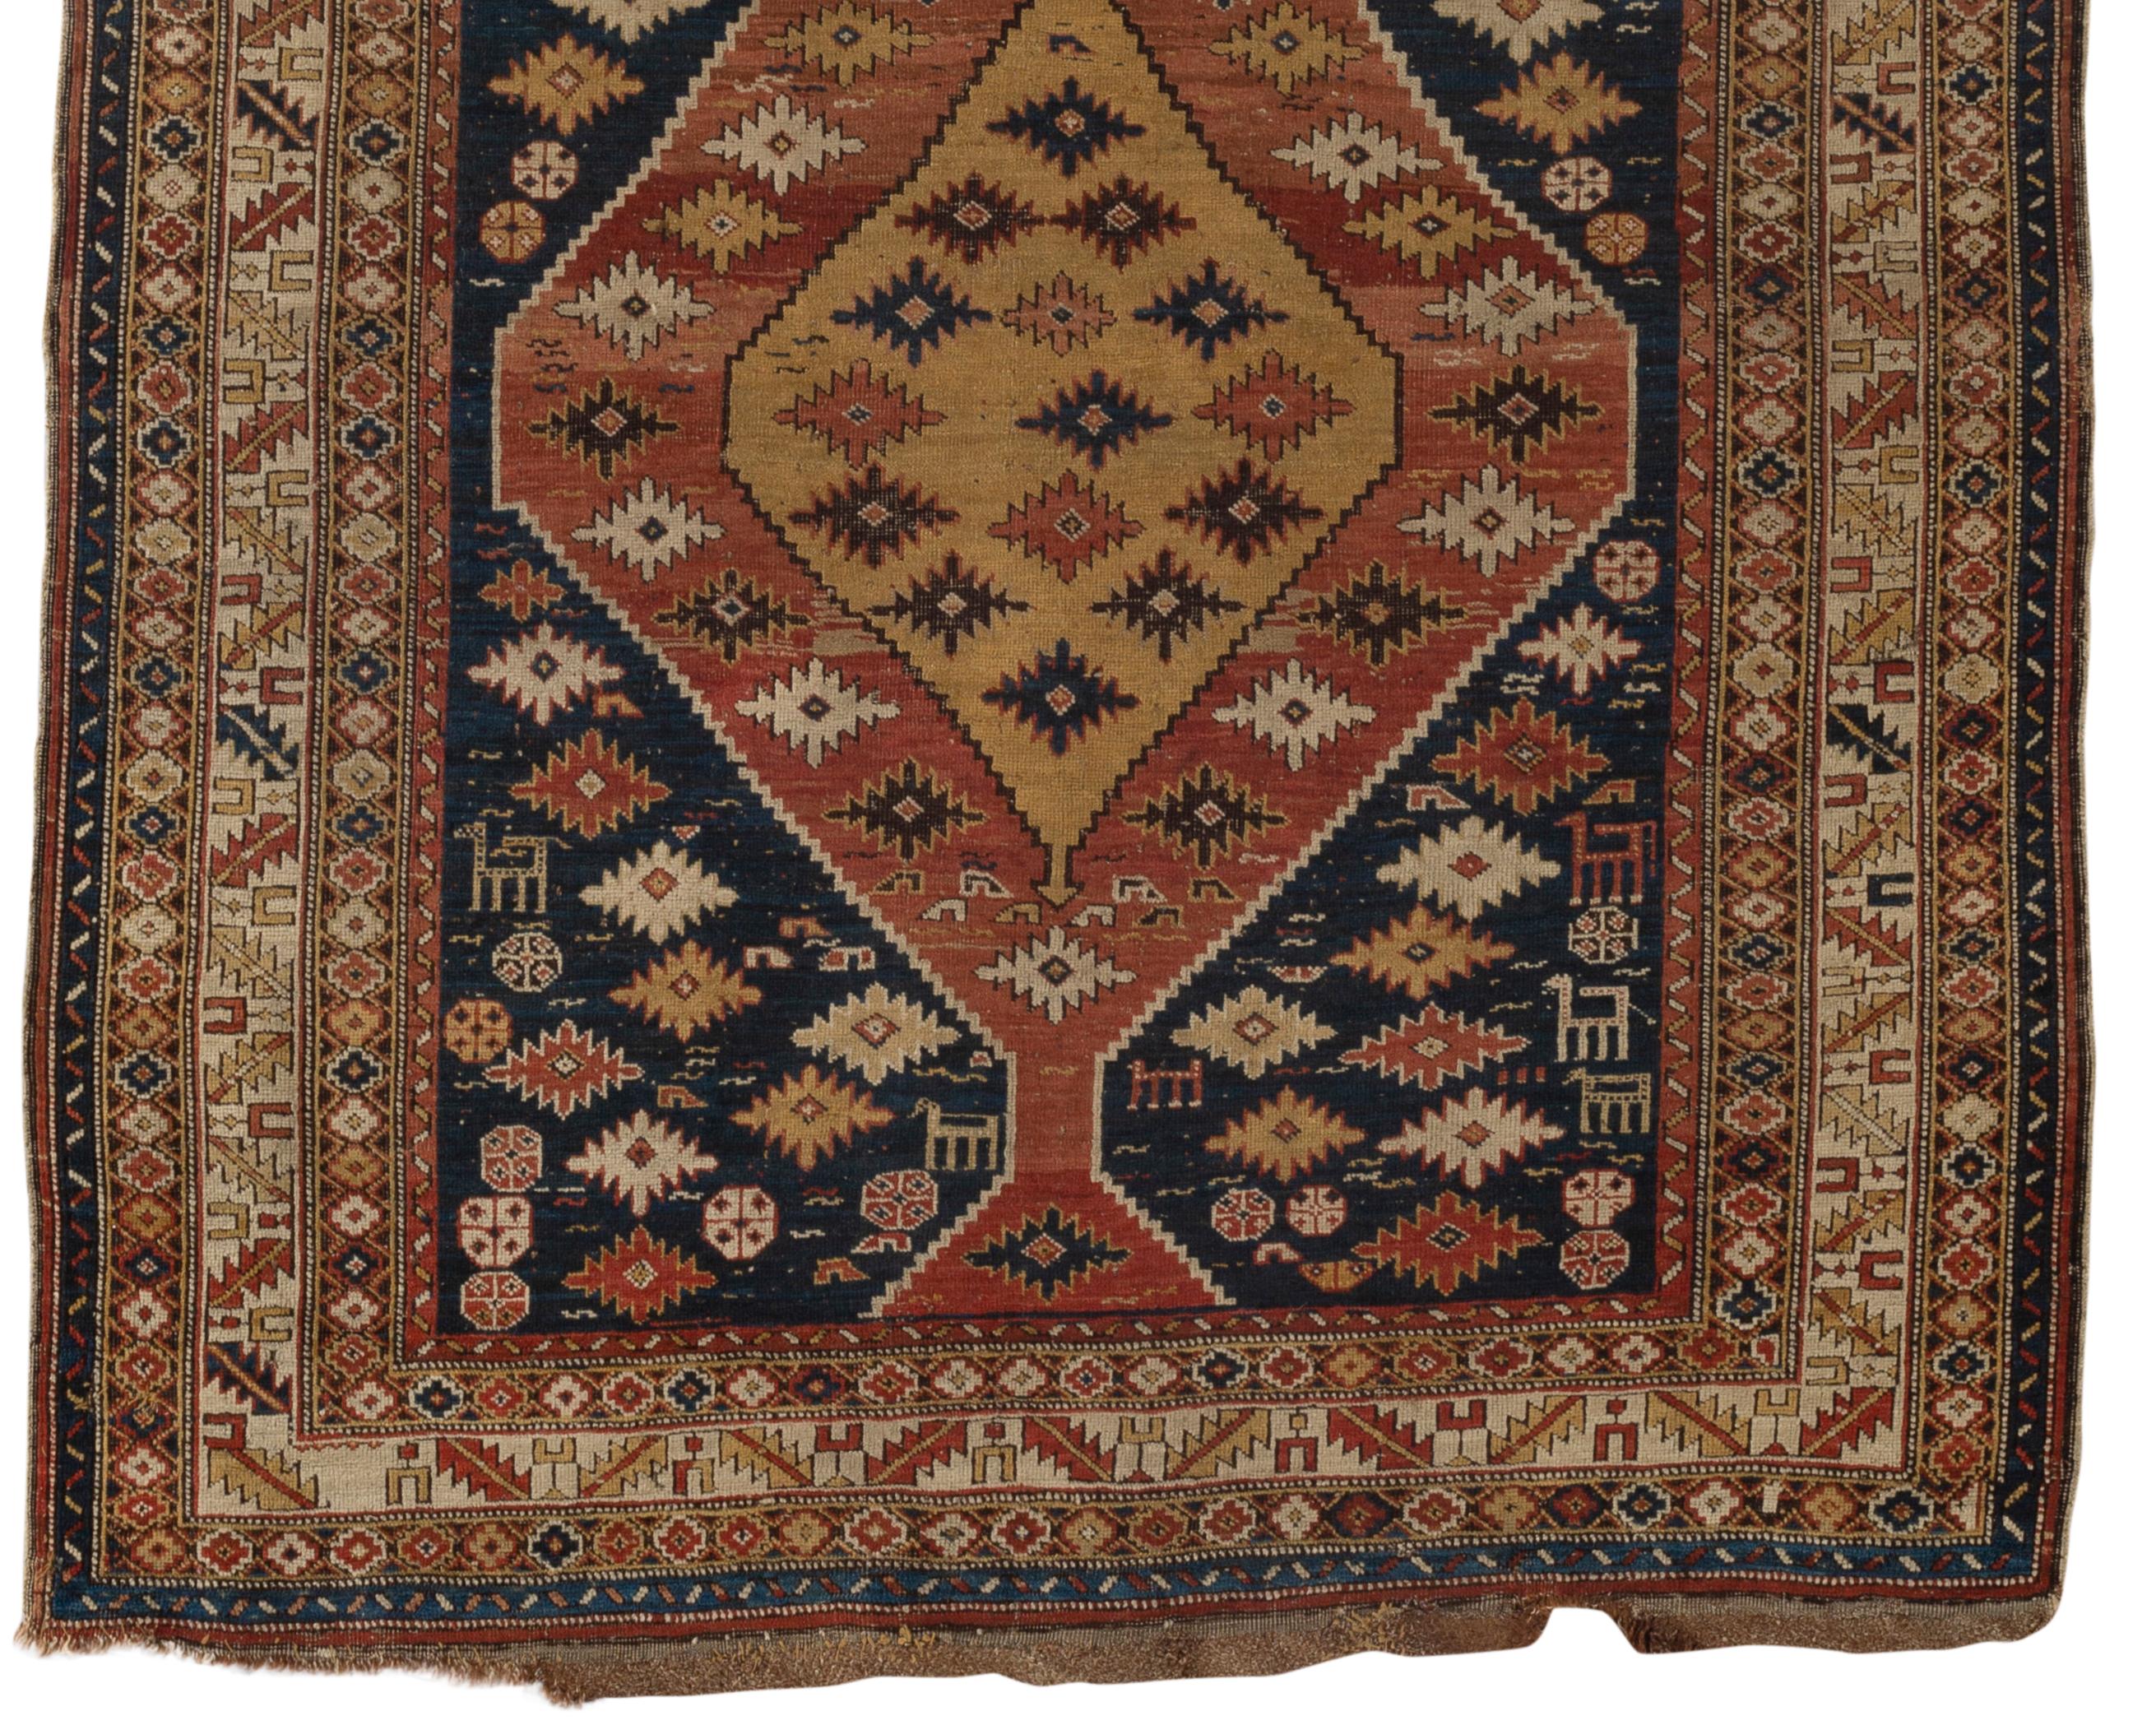 Antique Caucasian Dagestan rug, circa 1880. An interesting squarish rug with floral designs together with a few scattered animal figures woven into the piece surrounded by the traditional Caucasian multiple borders. Dagestan is located inside Russia